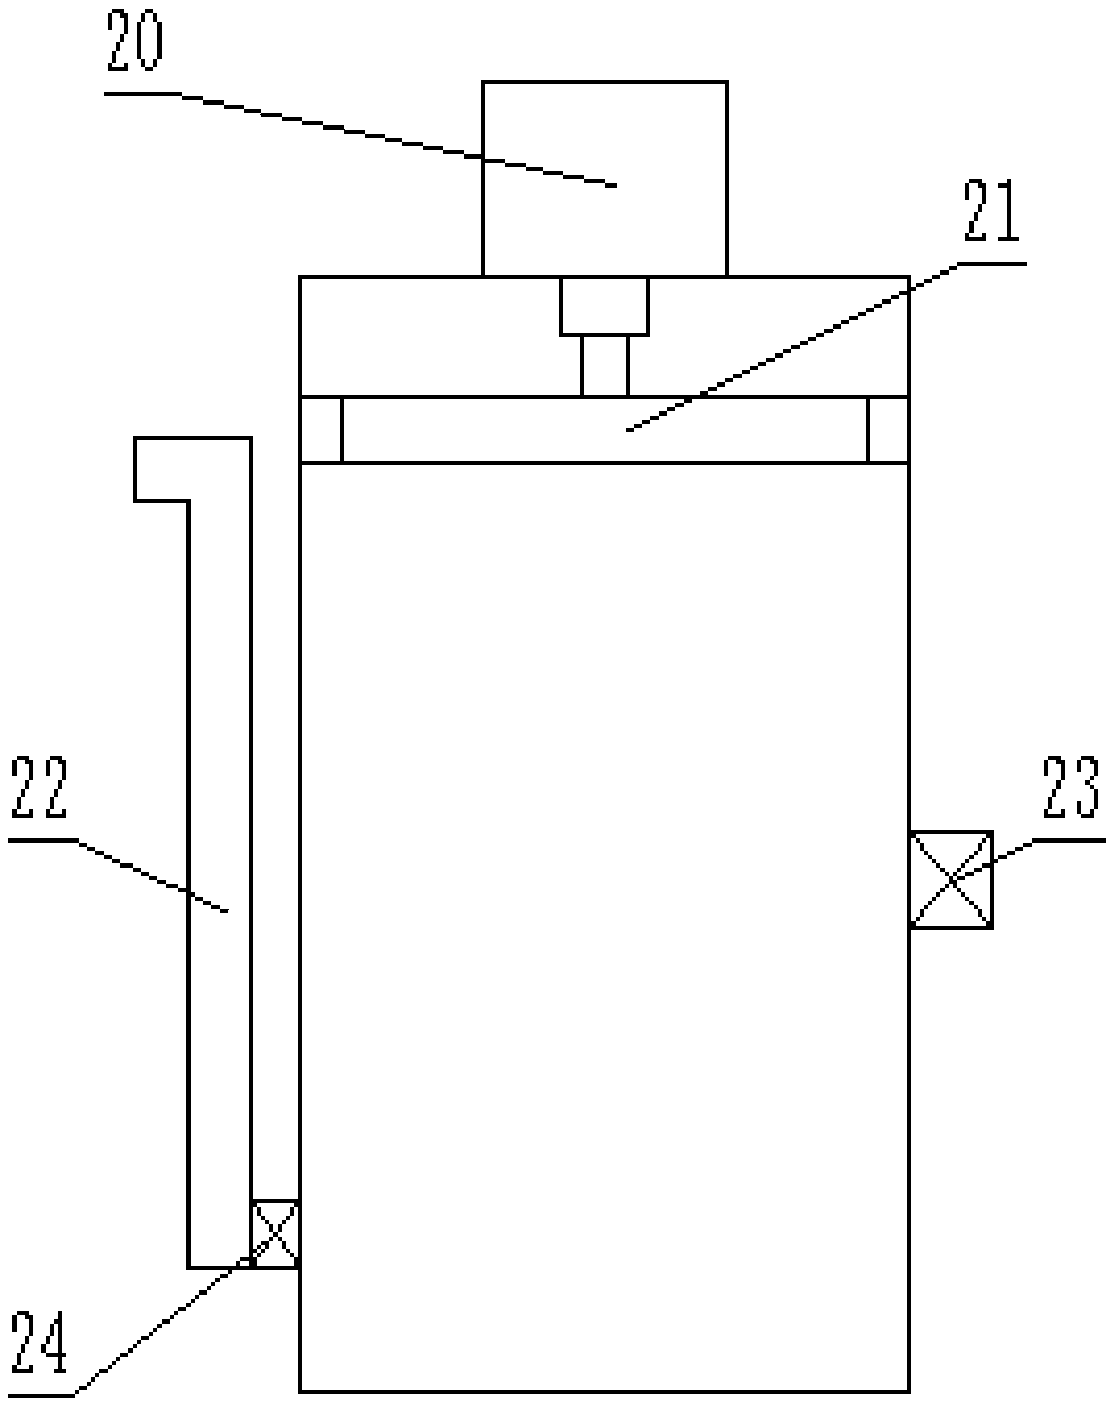 Pressurized and heated medical waste classification and pyrolysis device